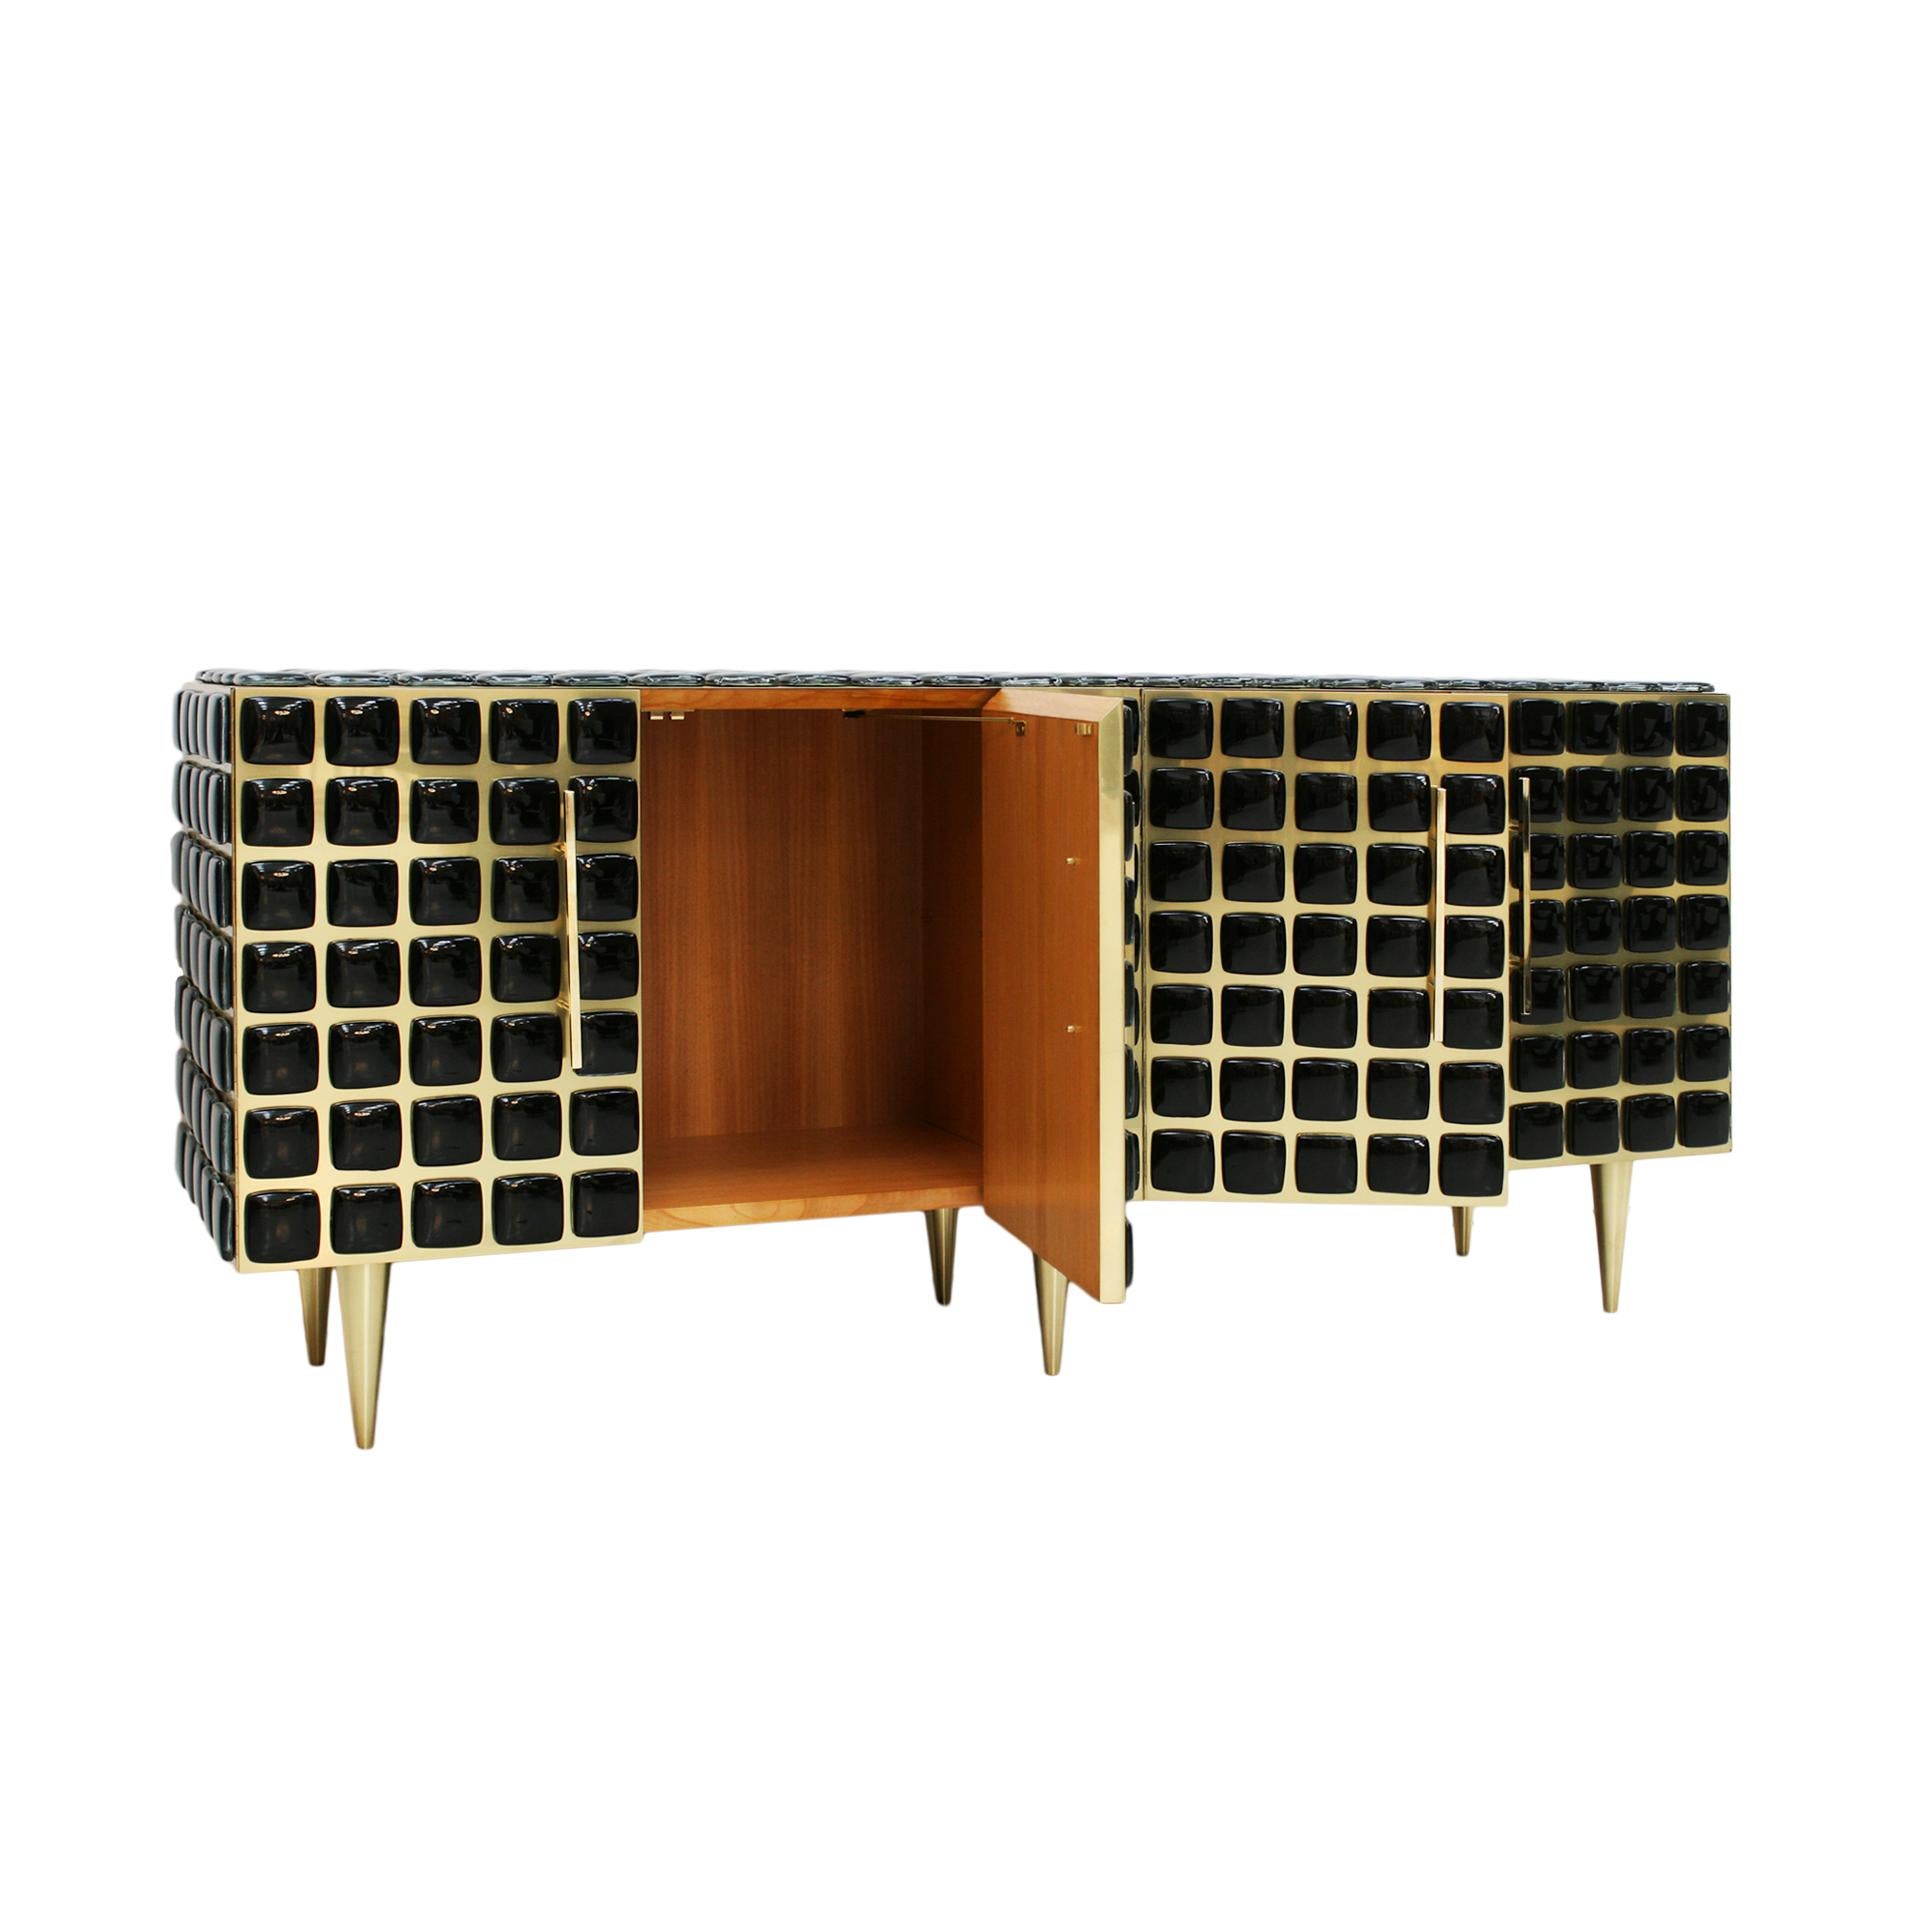 Italian Sideboard Made of Wood Brass & Decorated with Black Murano Glass Mosaics For Sale 2